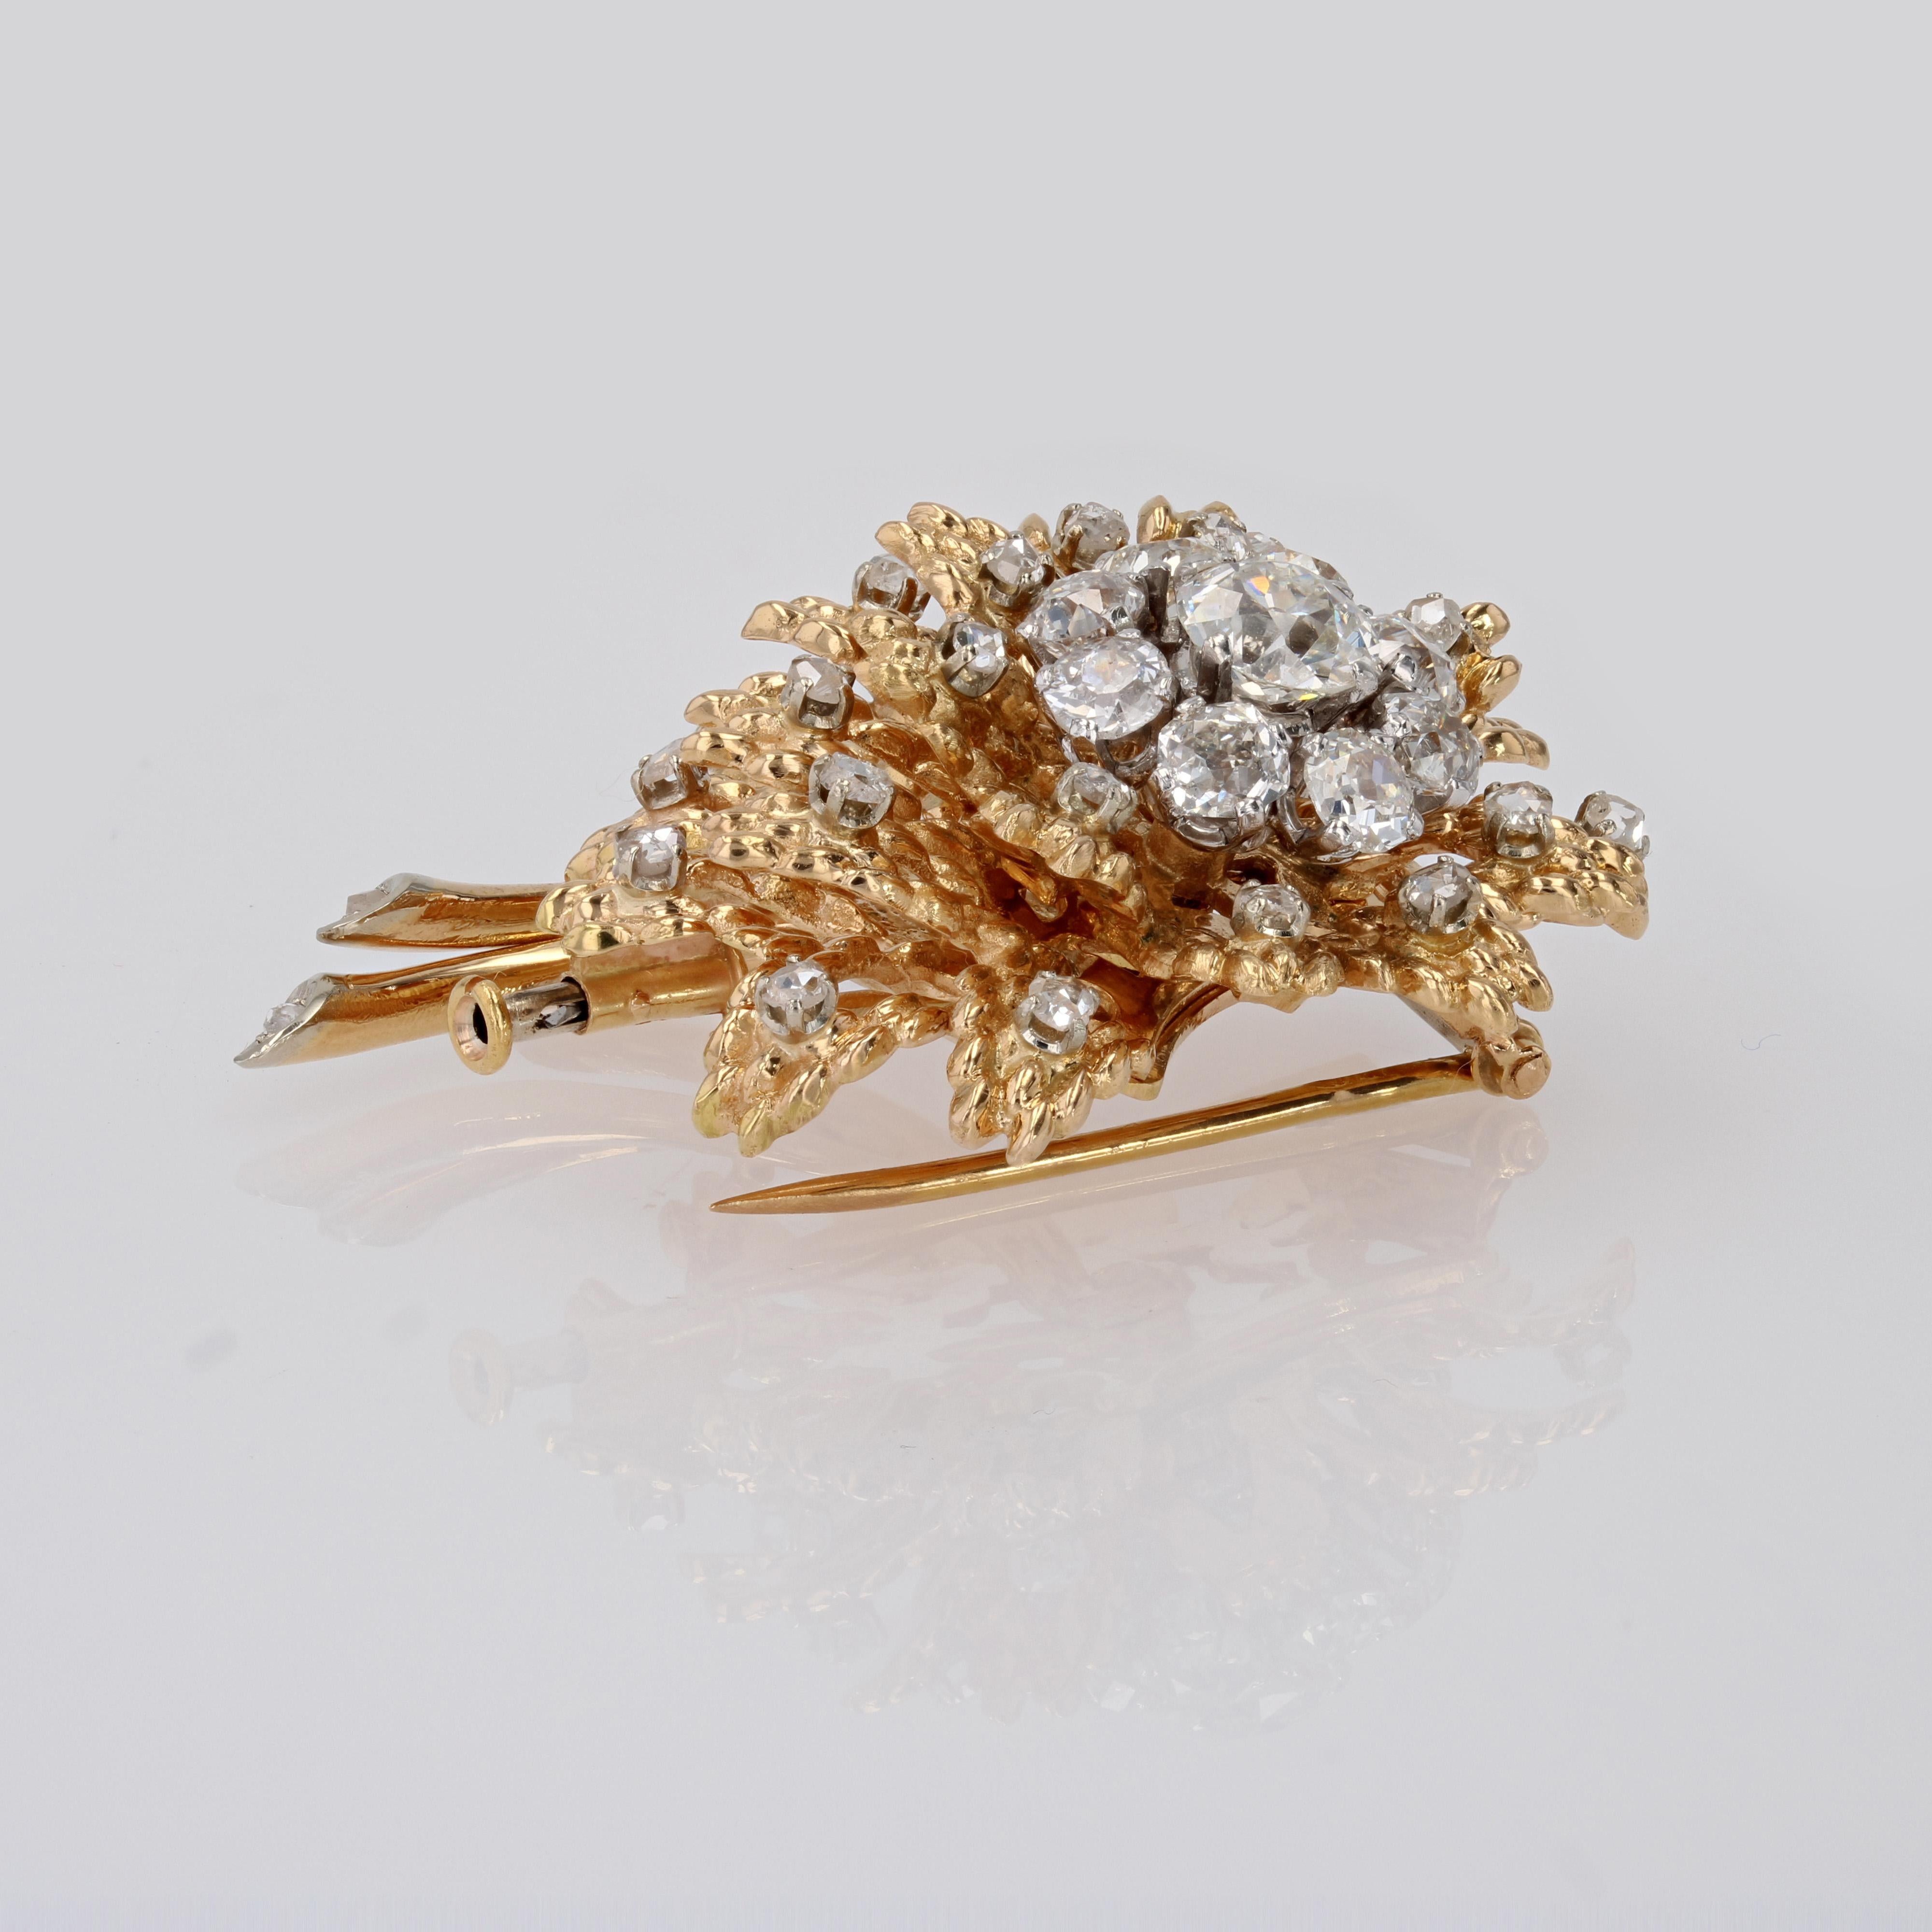 French 1950s Diamonds 18 Karat Yellow Gold Flower Brooch For Sale 6